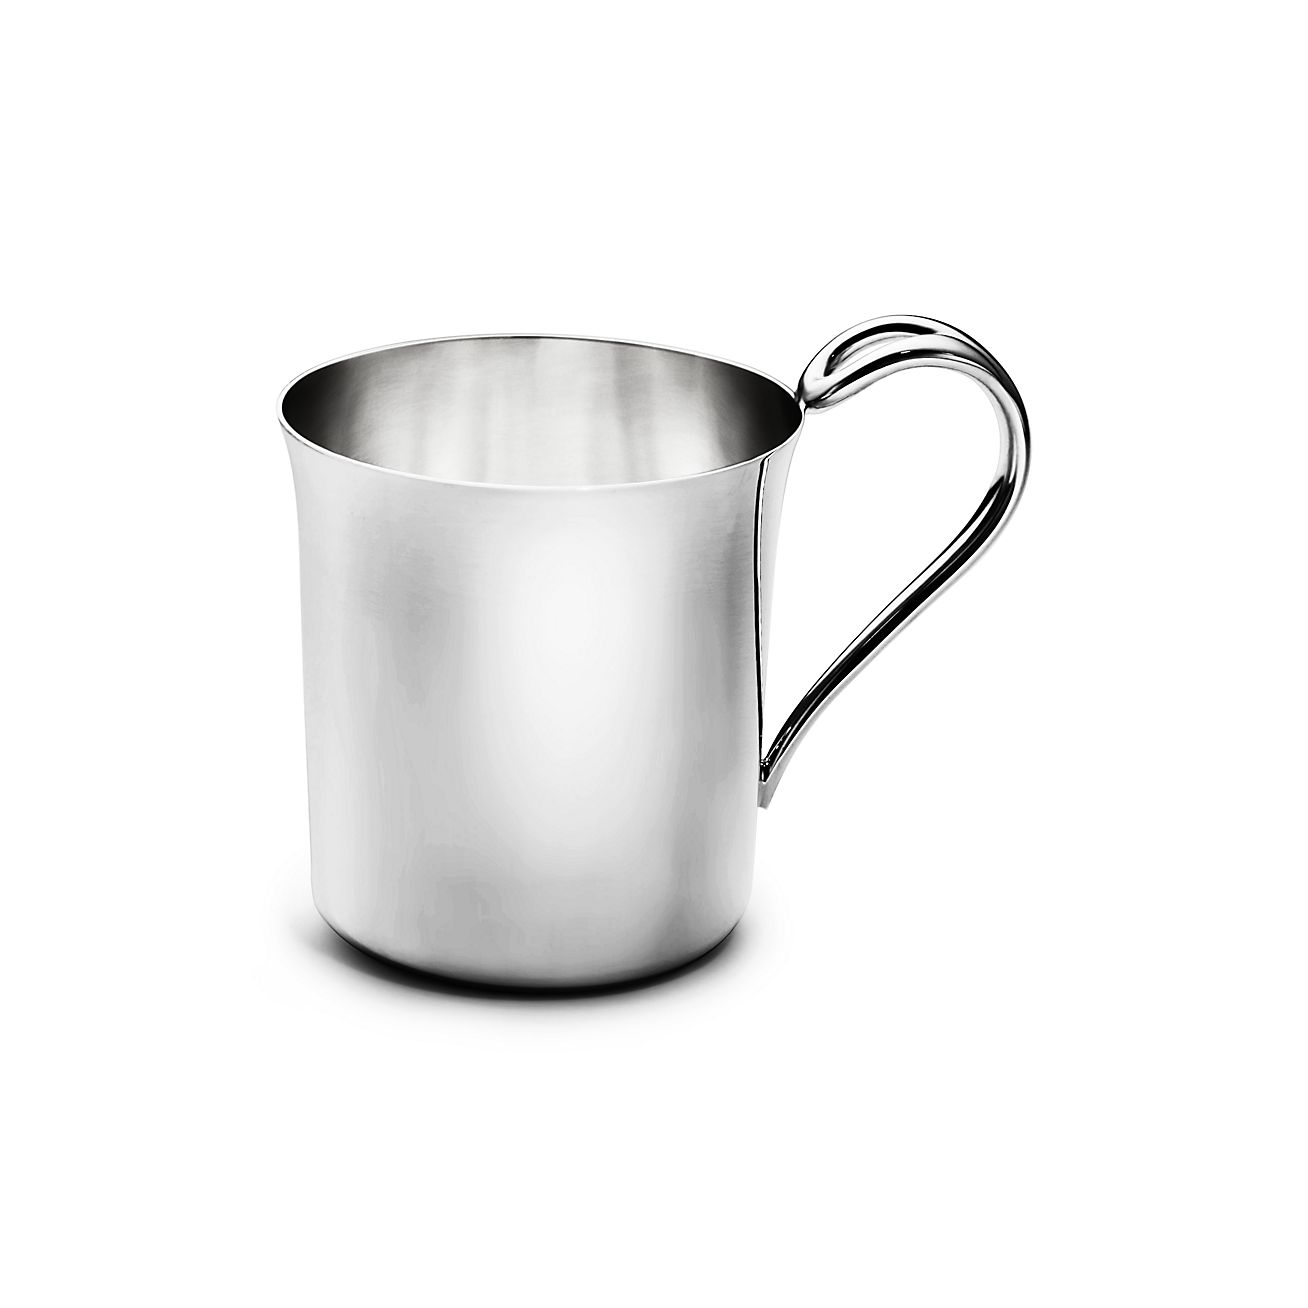 Elsa Peretti Padova Baby Cup in Sterling Silver, Size: 2.5 in.